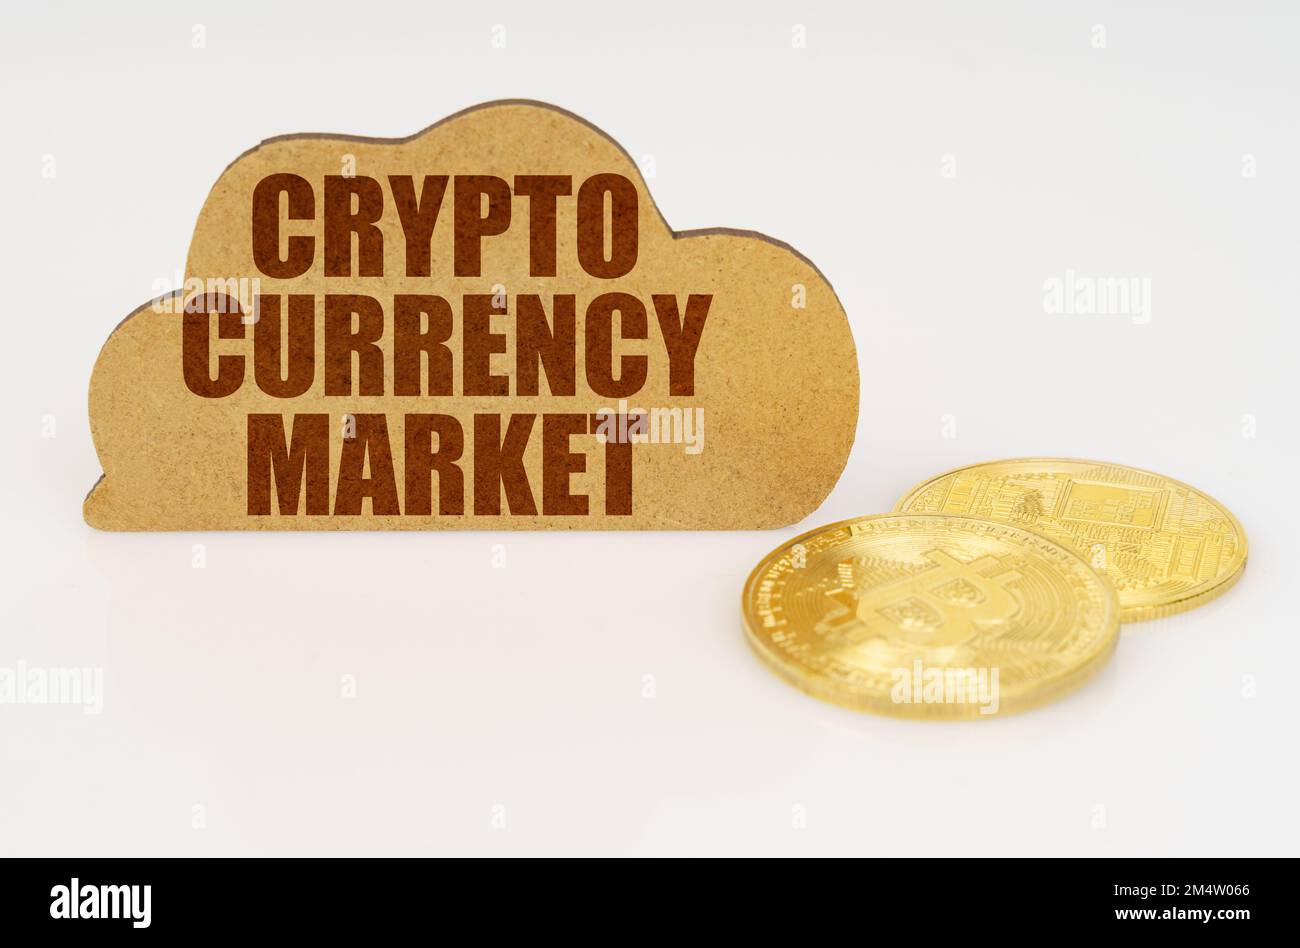 Business and technology concept. Bitcoins lie on a white surface and there is a sign - a cloud with the inscription - Crypto currency market Stock Photo